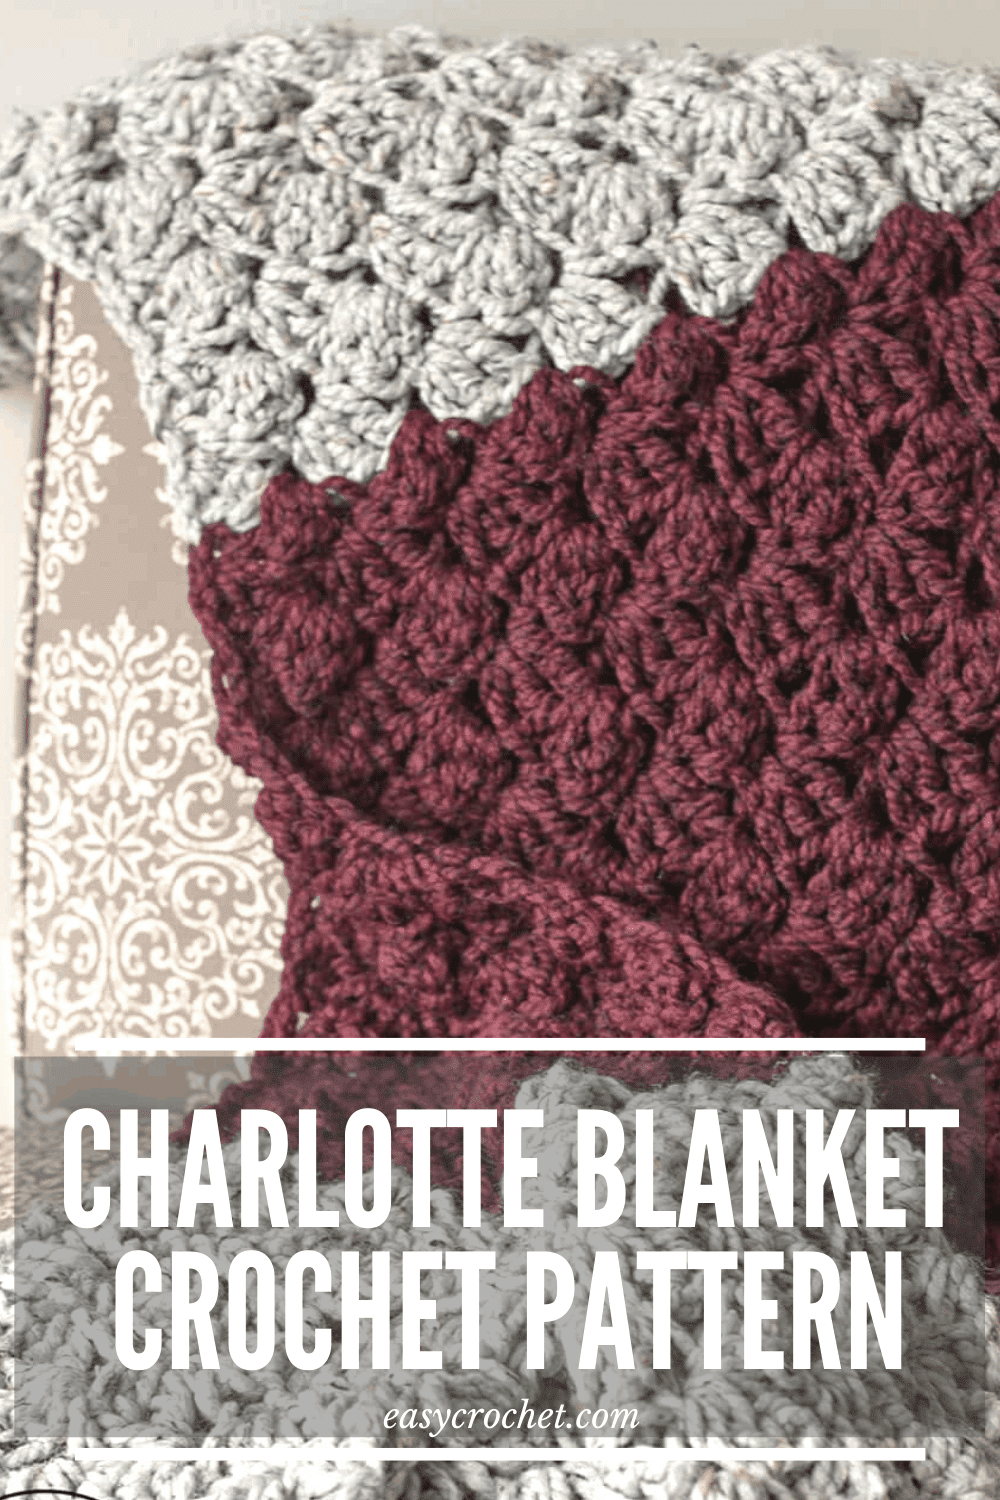 Free Crochet Blanket Pattern - The Charlotte - Beginner-Friendly and works up fast! Find the free crochet pattern at easycrochet.com via @easycrochetcom